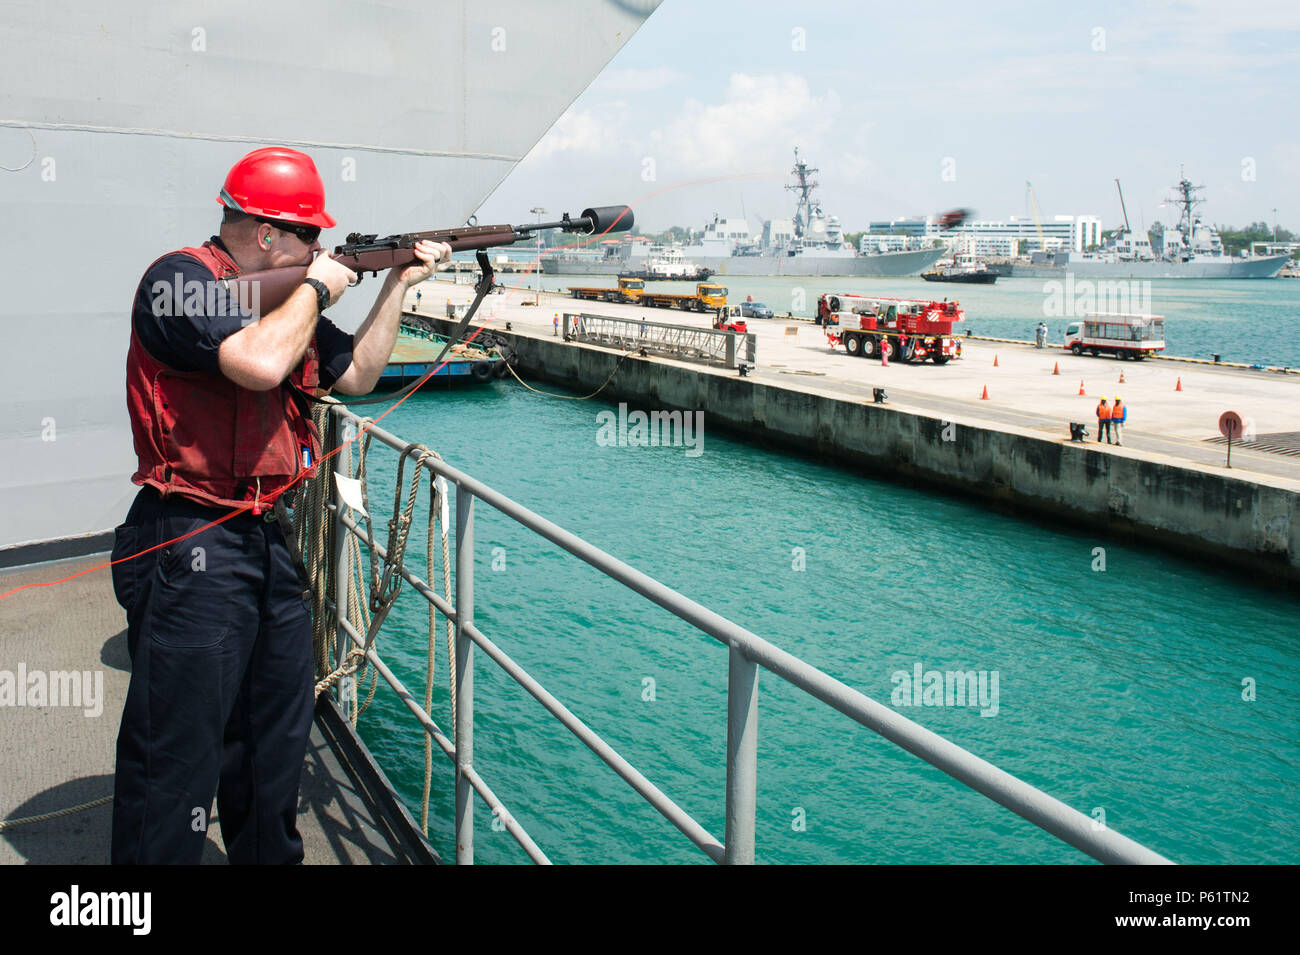 160419-N-XX566-103 SOUTH CHINA SEA (April 19, 2016) - Aviation Ordnanceman 1st Class Benjamin Llewellyn, from Hawthorne, Nev., fires a shot line from USS John C. Stennis' (CVN 74) fantail. Providing a ready force supporting security and stability in the Indo-Asia-Pacific, John C. Stennis is operating as part of the Great Green Fleet on a regularly scheduled 7th Fleet deployment. (U.S. Navy photo by Mass Communication Specialist 3rd Class Andre T. Richard/ Released) Stock Photo